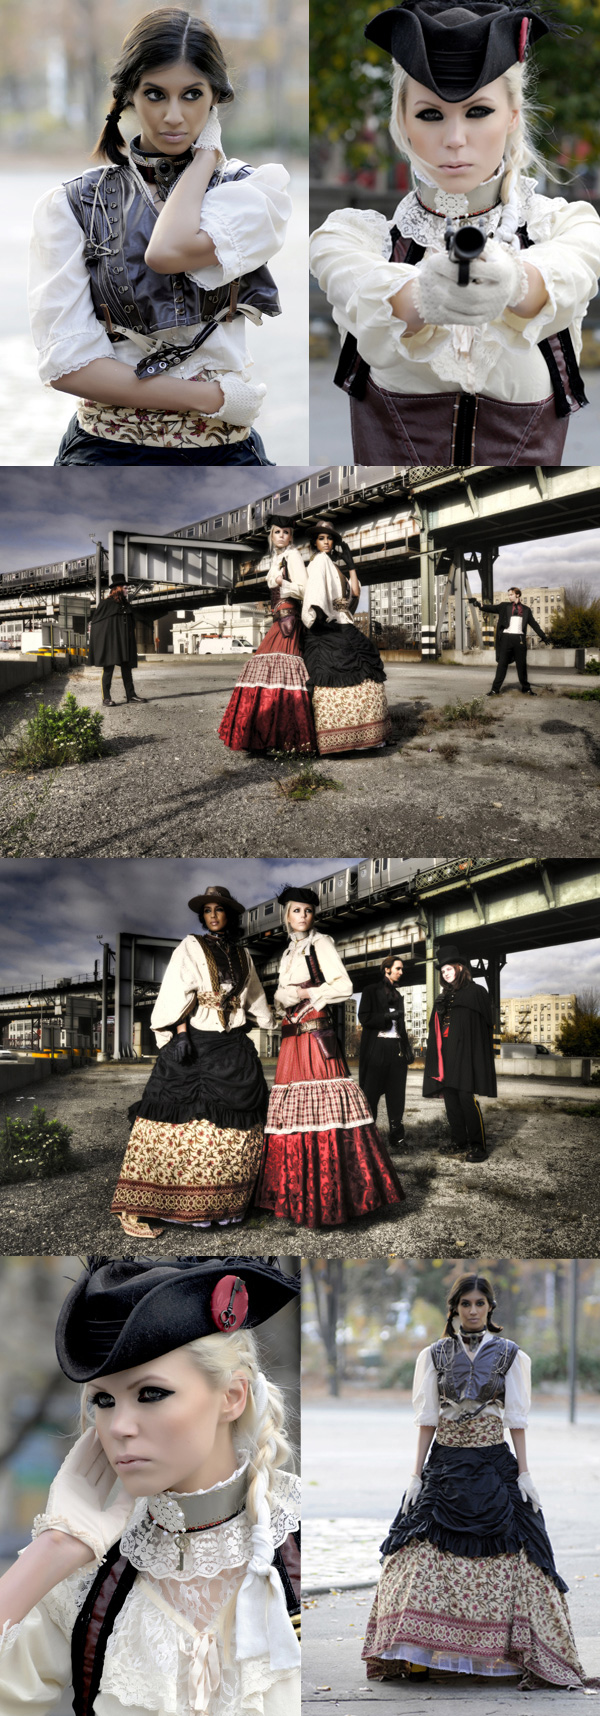 Male and Female model photo shoot of mikey poz, Anjhula Bais, G D Falksen, Milla Tuori and August Wahnsinger in Brooklyn, New York , makeup by Lyndsey Ariel, clothing designed by Berit New York